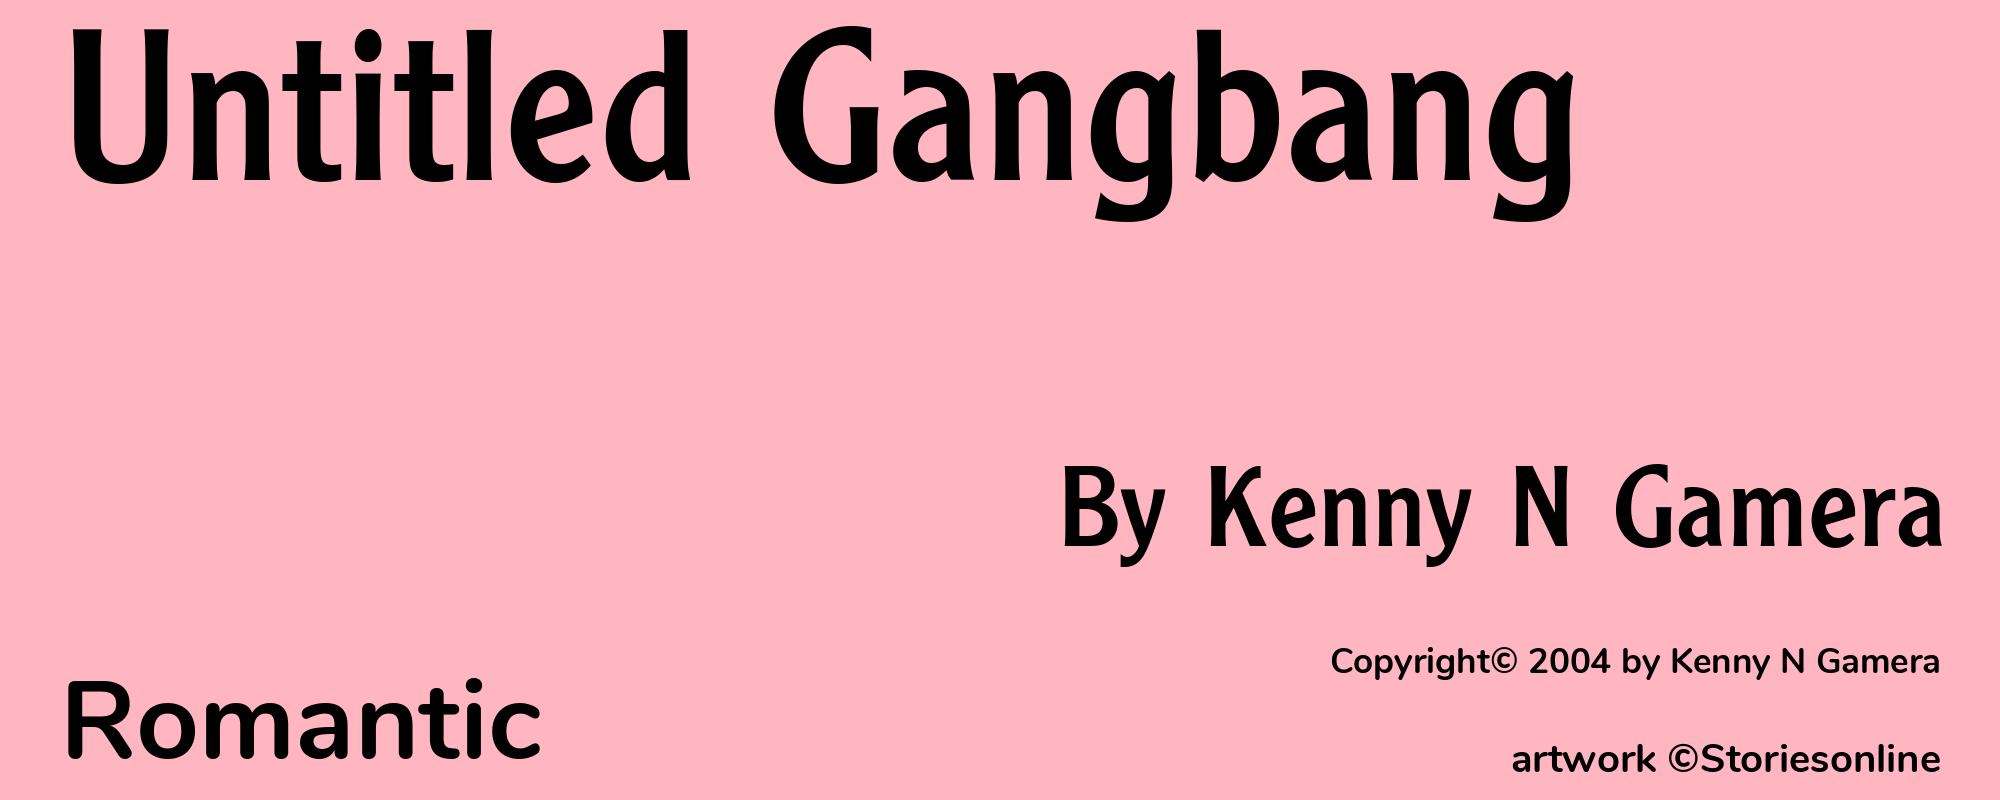 Untitled Gangbang - Cover